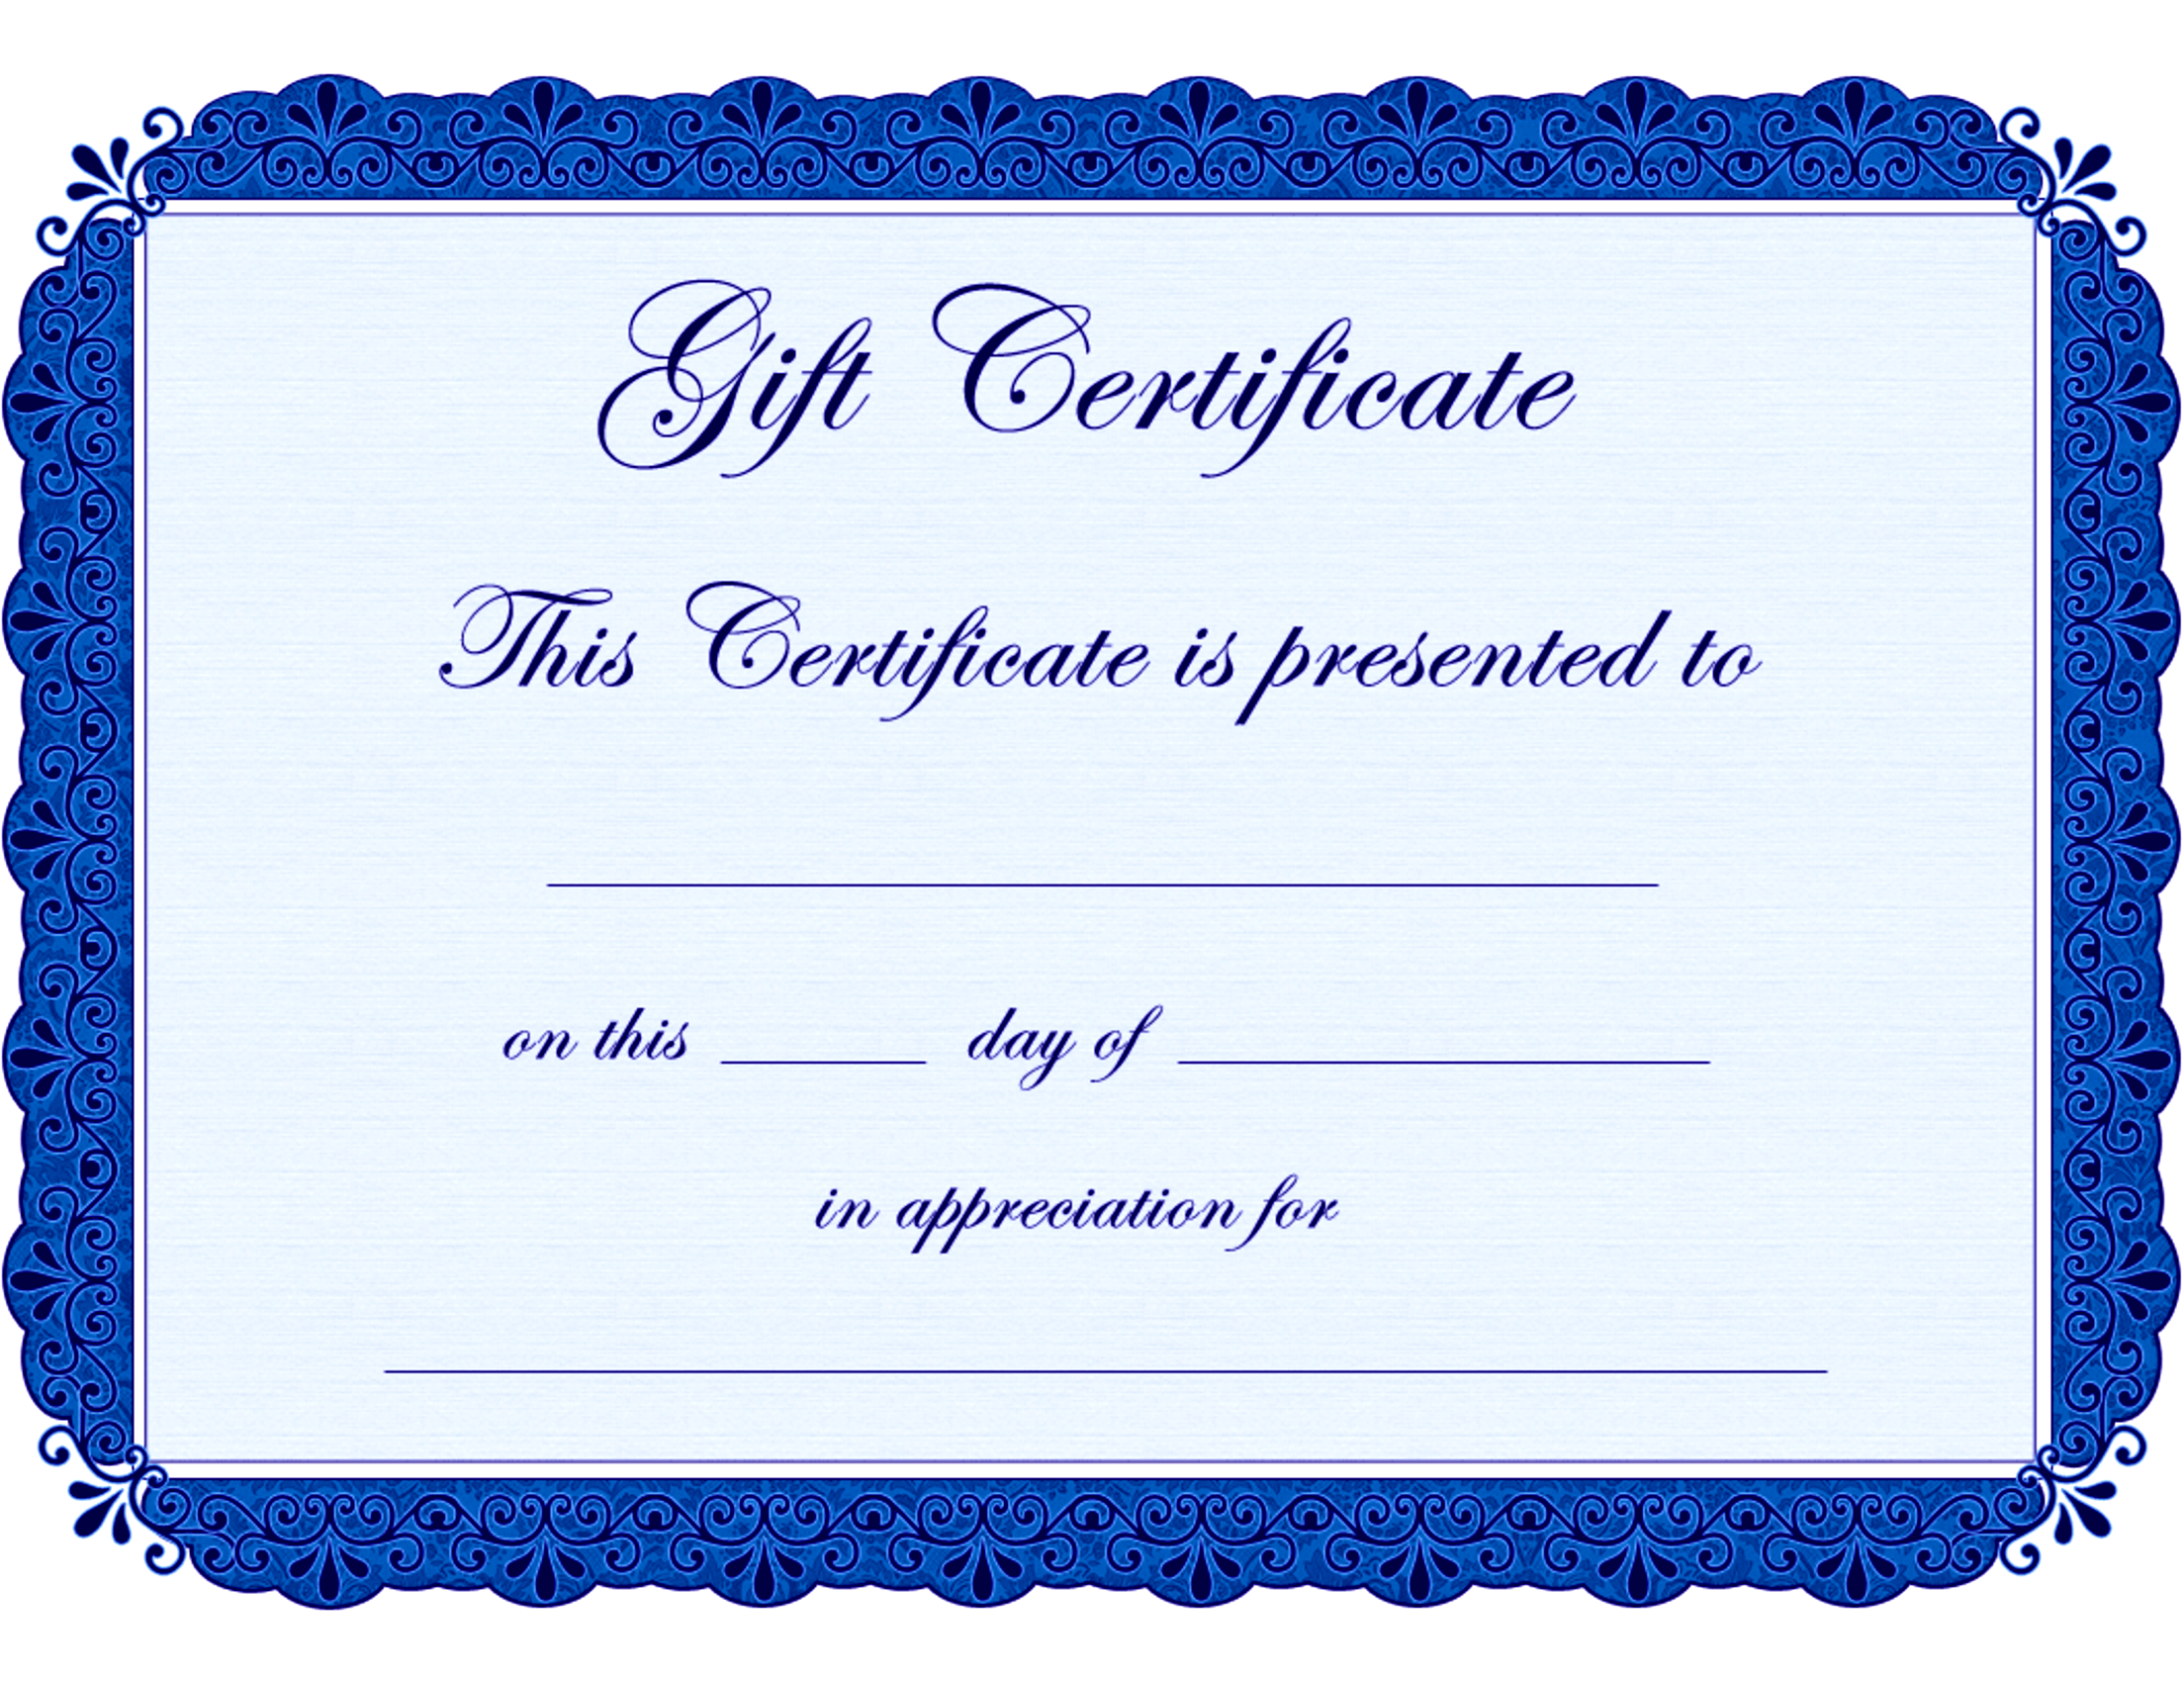 babysitting-certificate-template-7-paddle-templates